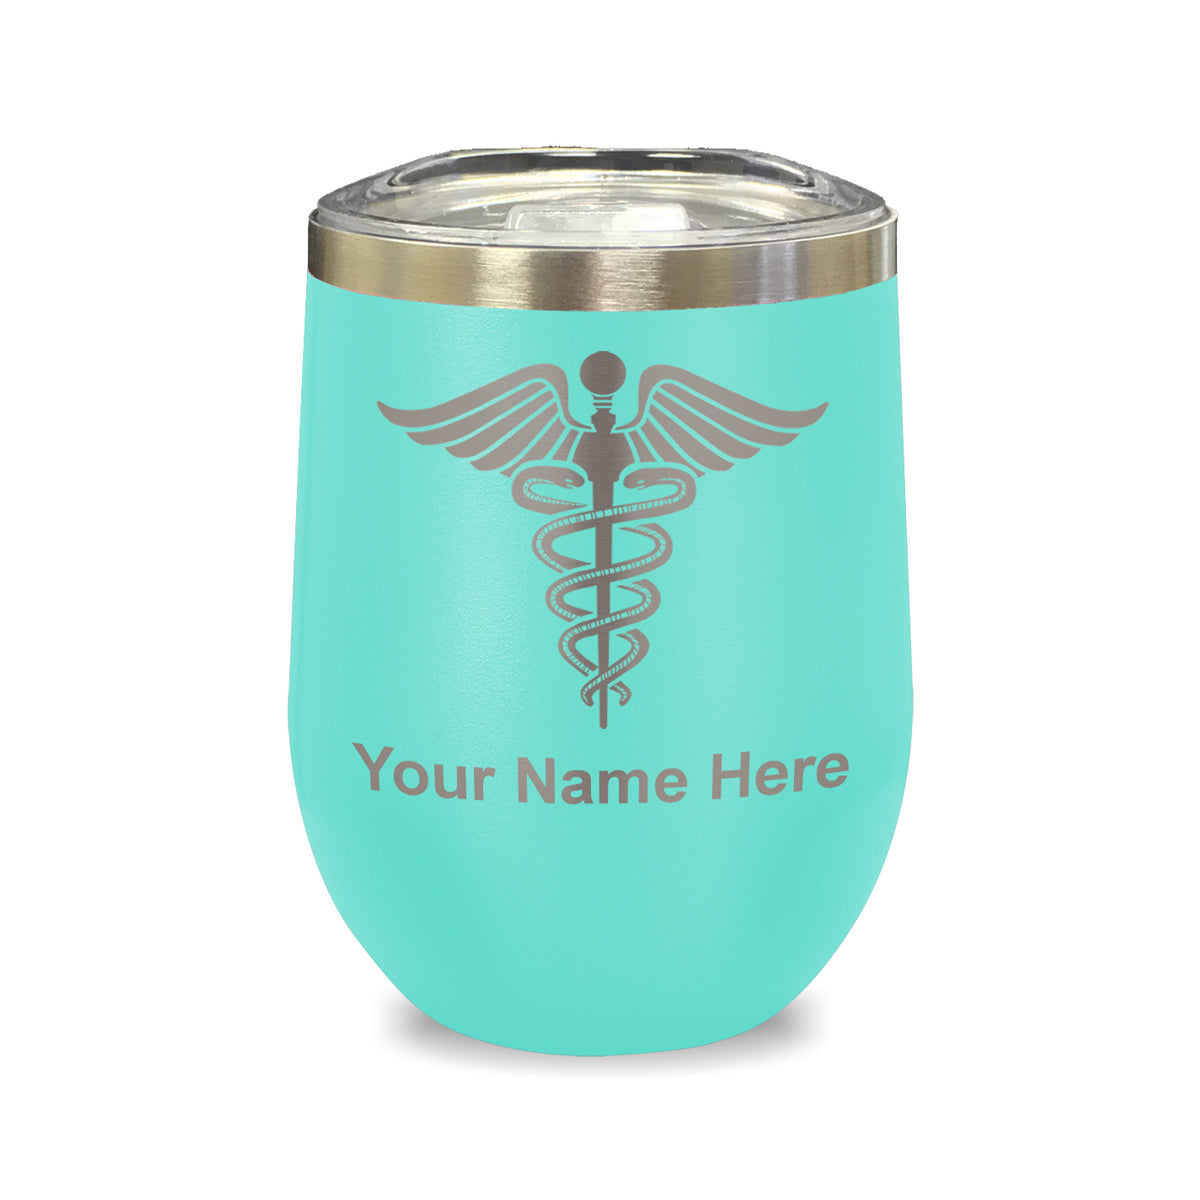 LaserGram Double Wall Stainless Steel Wine Glass, Caduceus Medical Symbol, Personalized Engraving Included